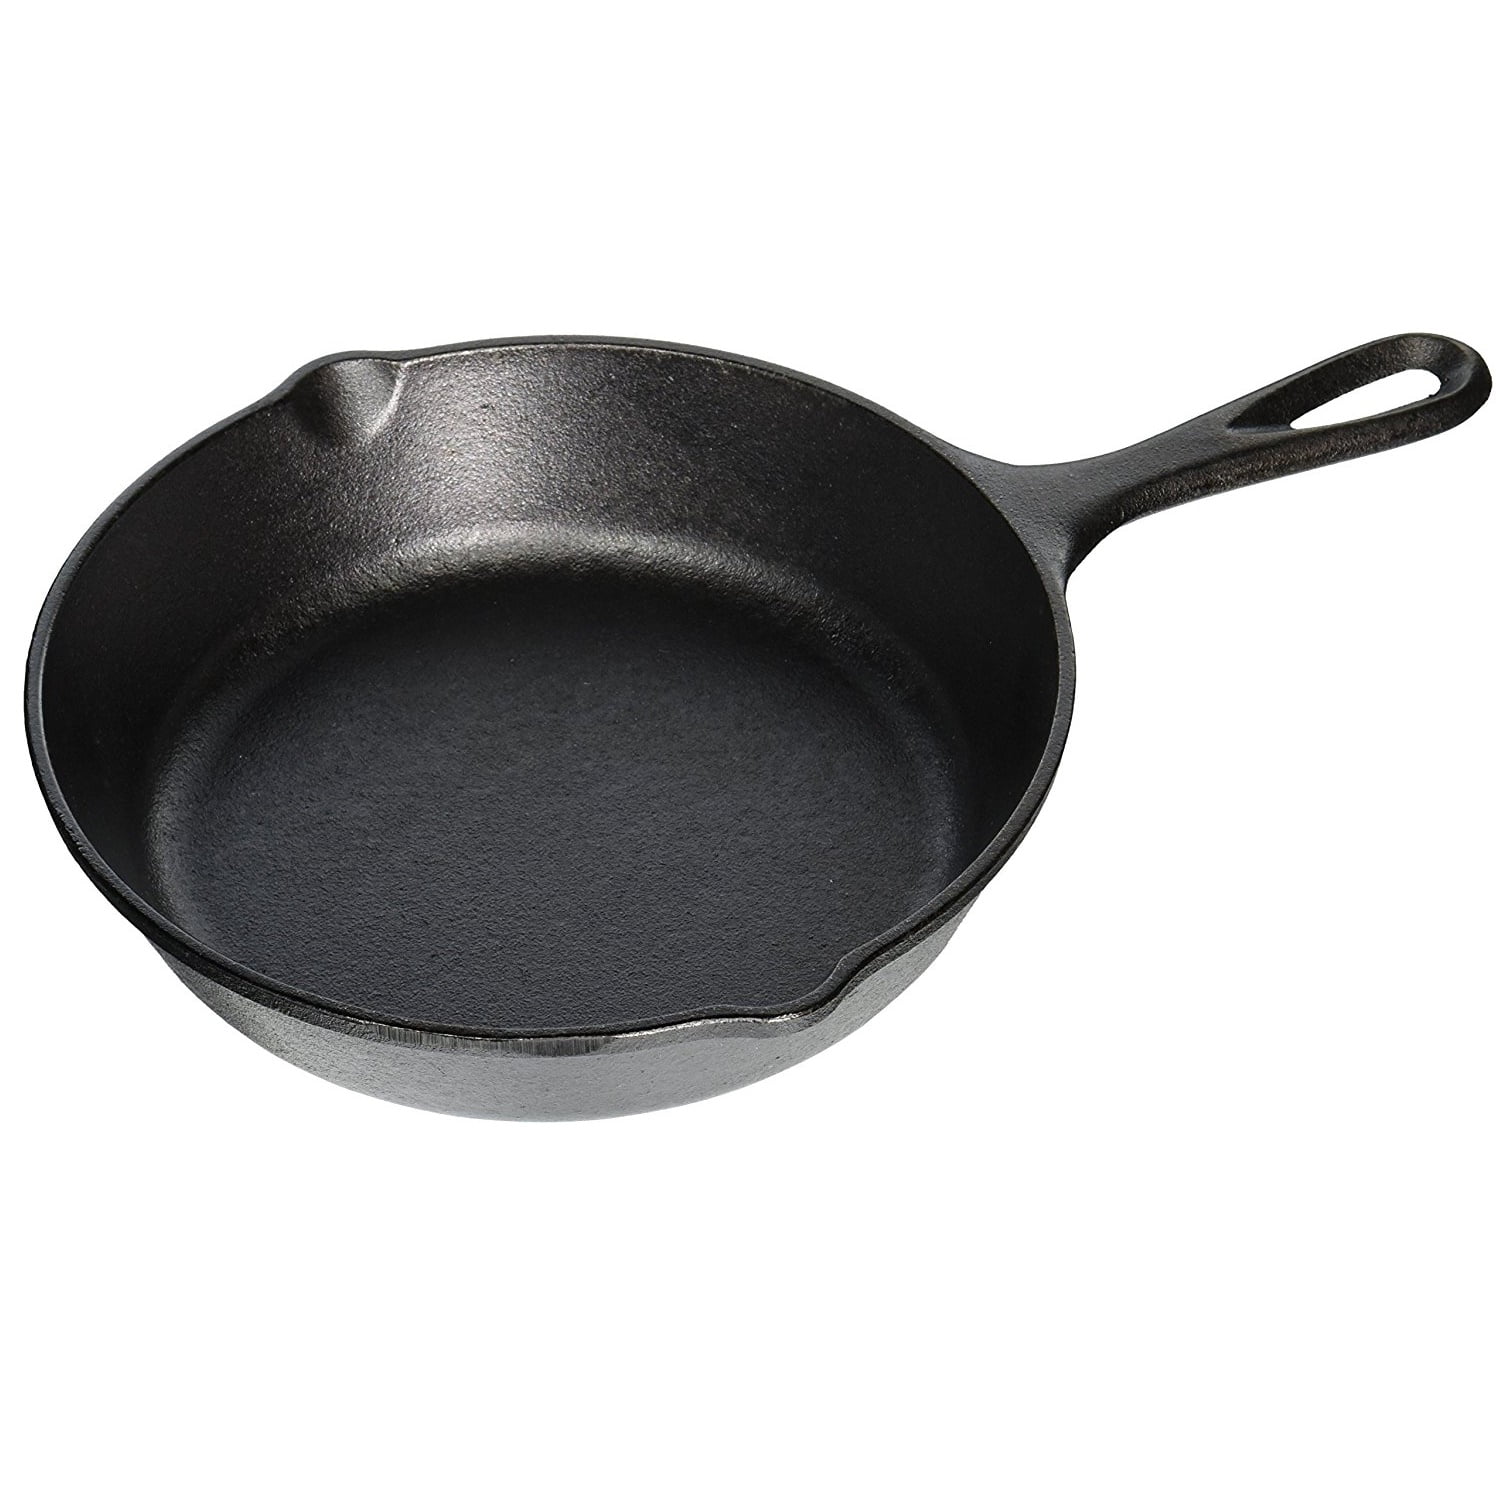 Lodge Pre-Seasoned 12 Inch. Cast Iron Skillet with Assist Handle